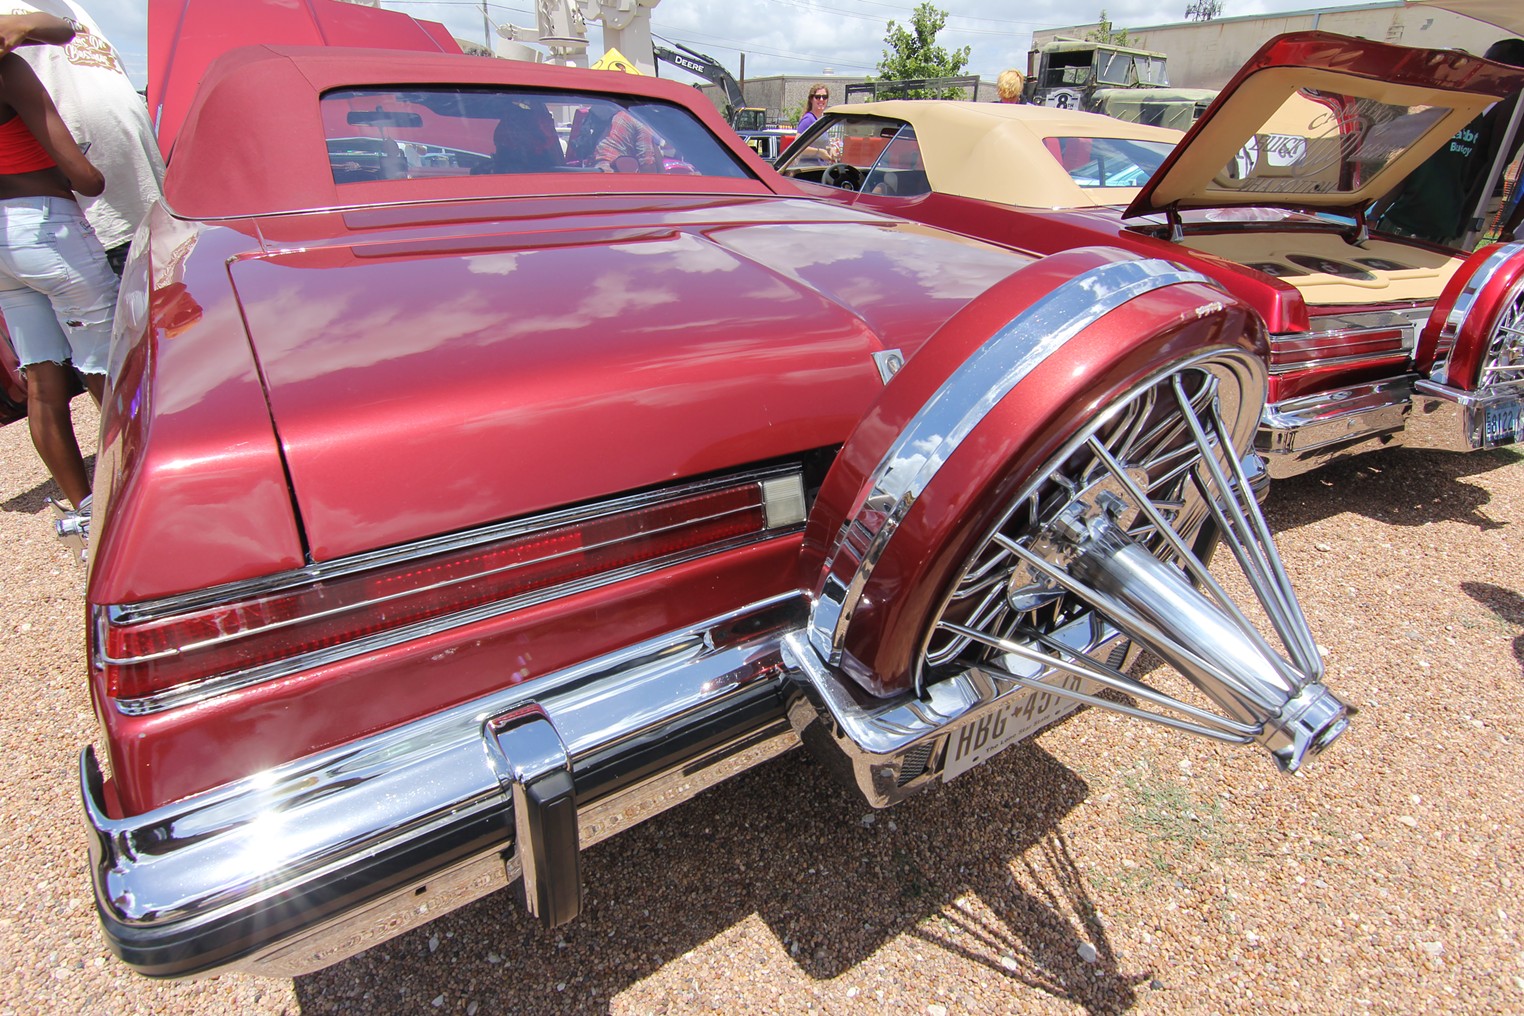 Swangin' and Bangin' at the Slab Holiday Concert and Car Show, Houston, Houston Press